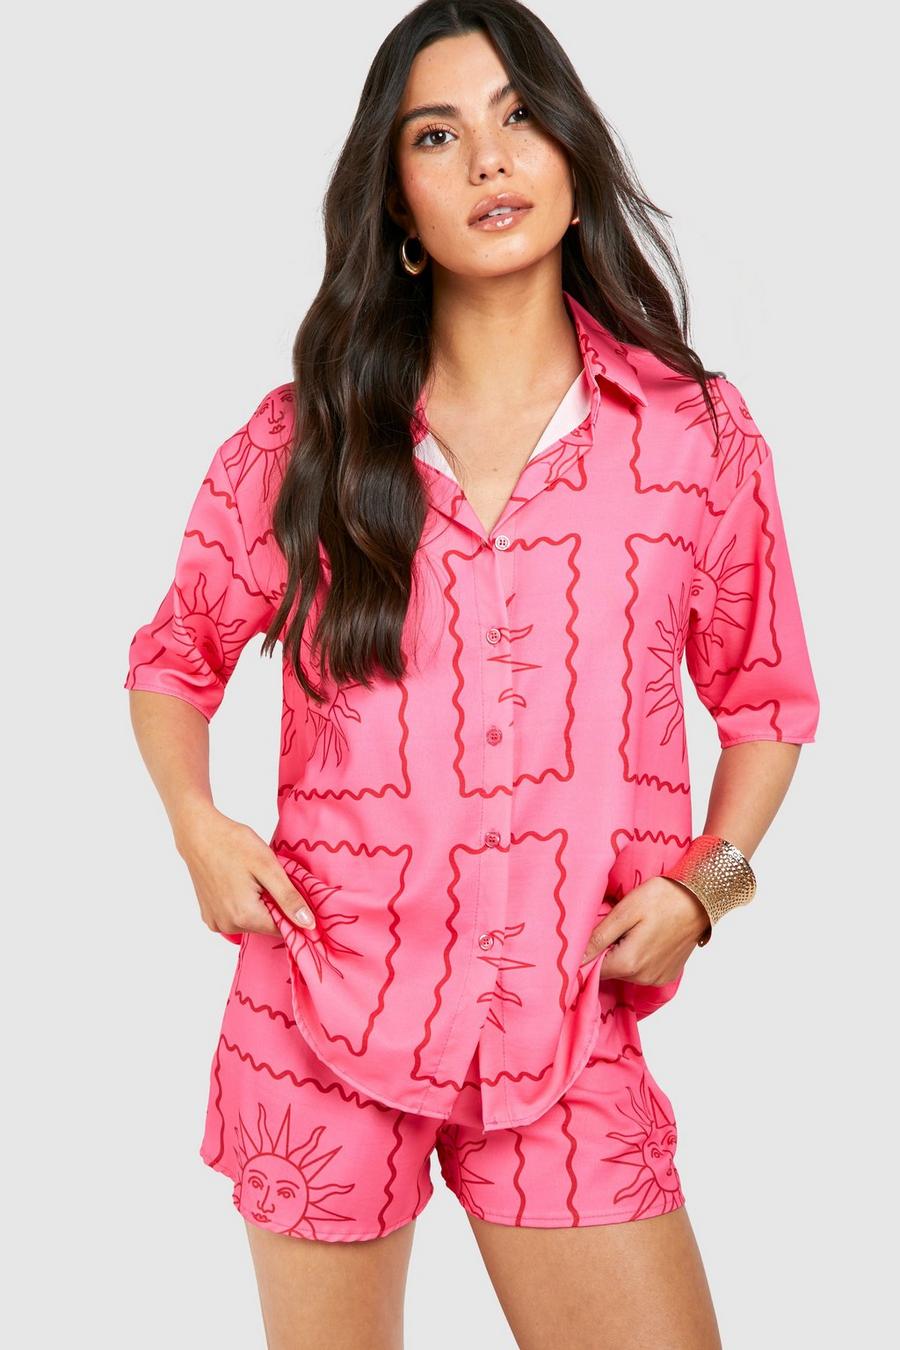 Hammered Sun Print Relaxed Fit Shirt & Shorts, Hot pink